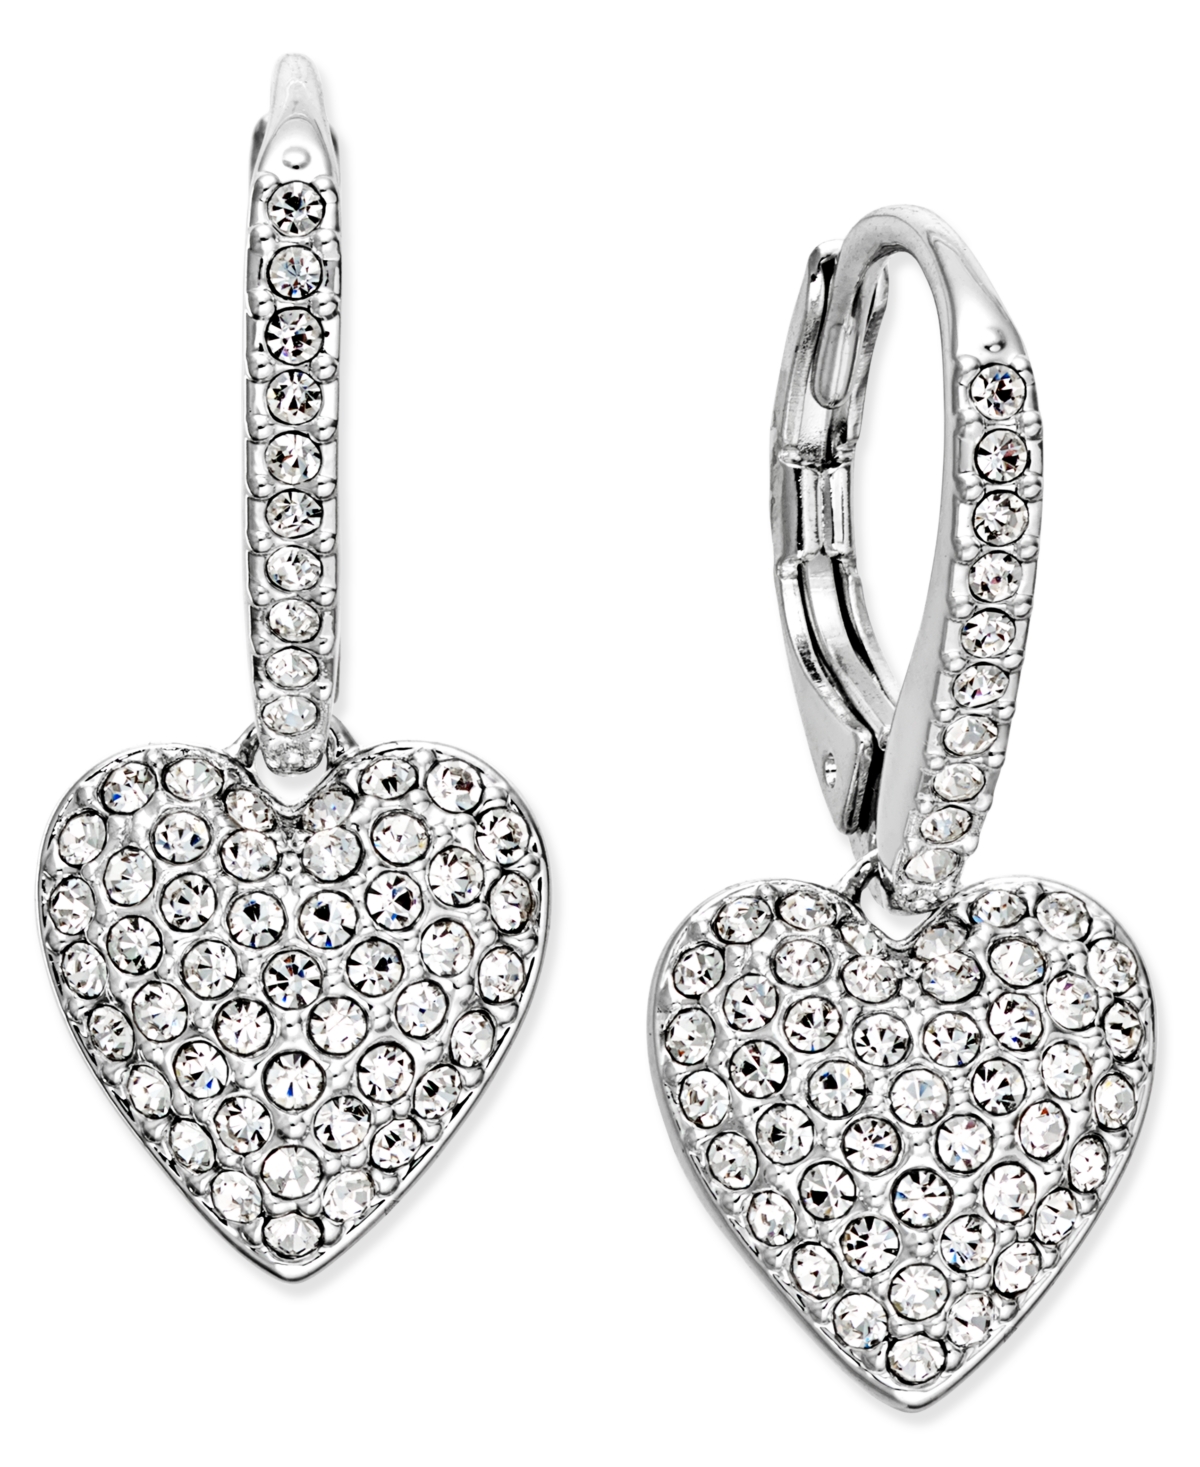 Pave Heart Drop Earrings, Created for Macy's - Rose Gold